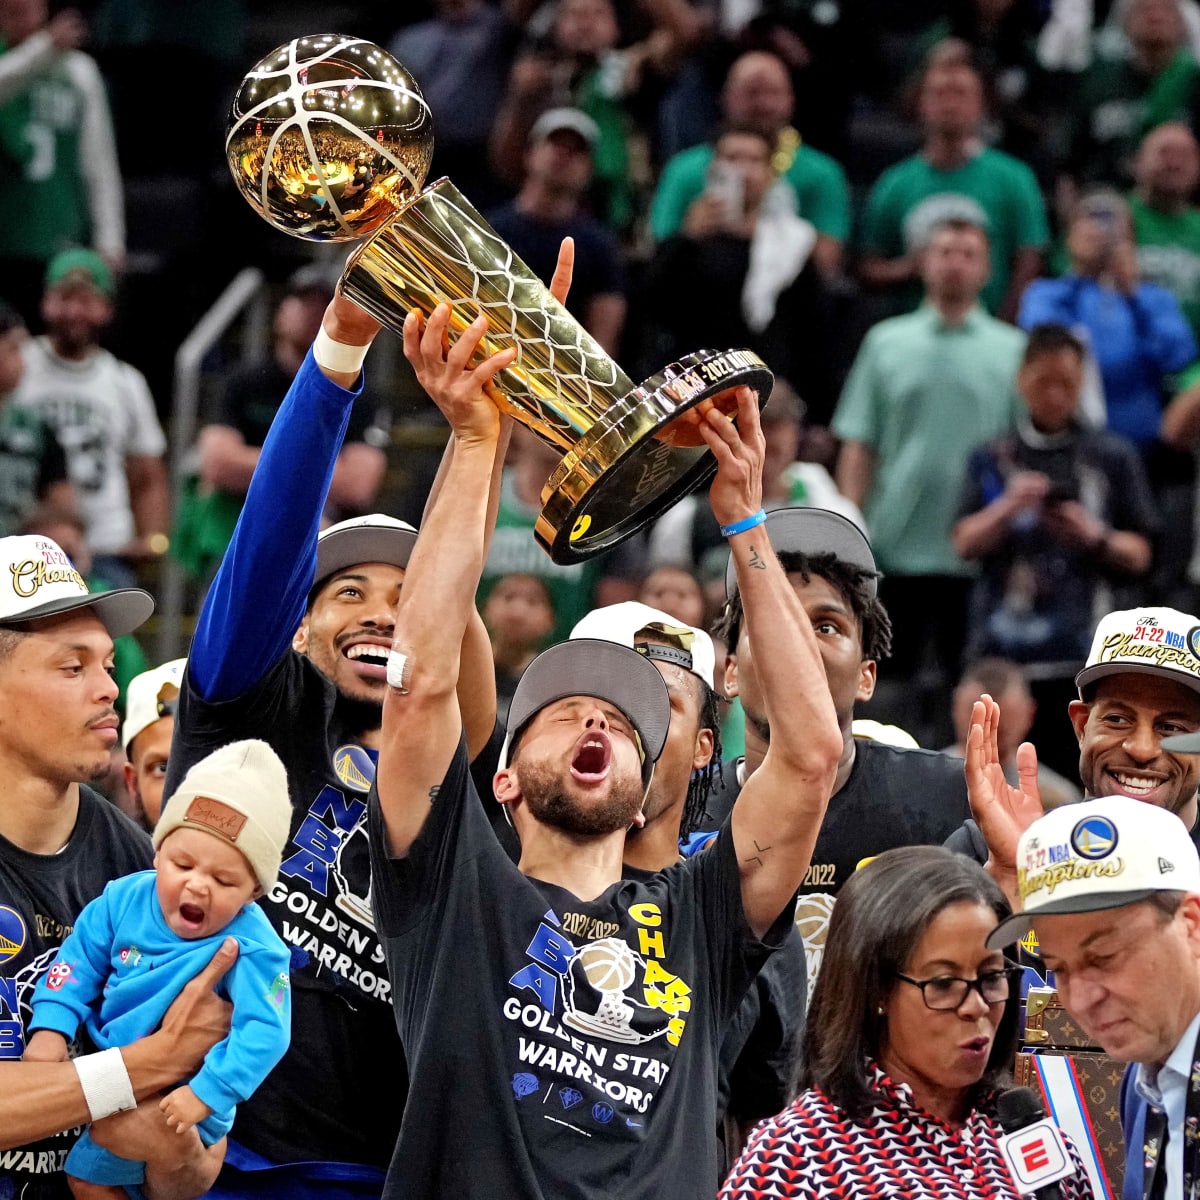 Warriors close out Celtics in Game 6 to win NBA title